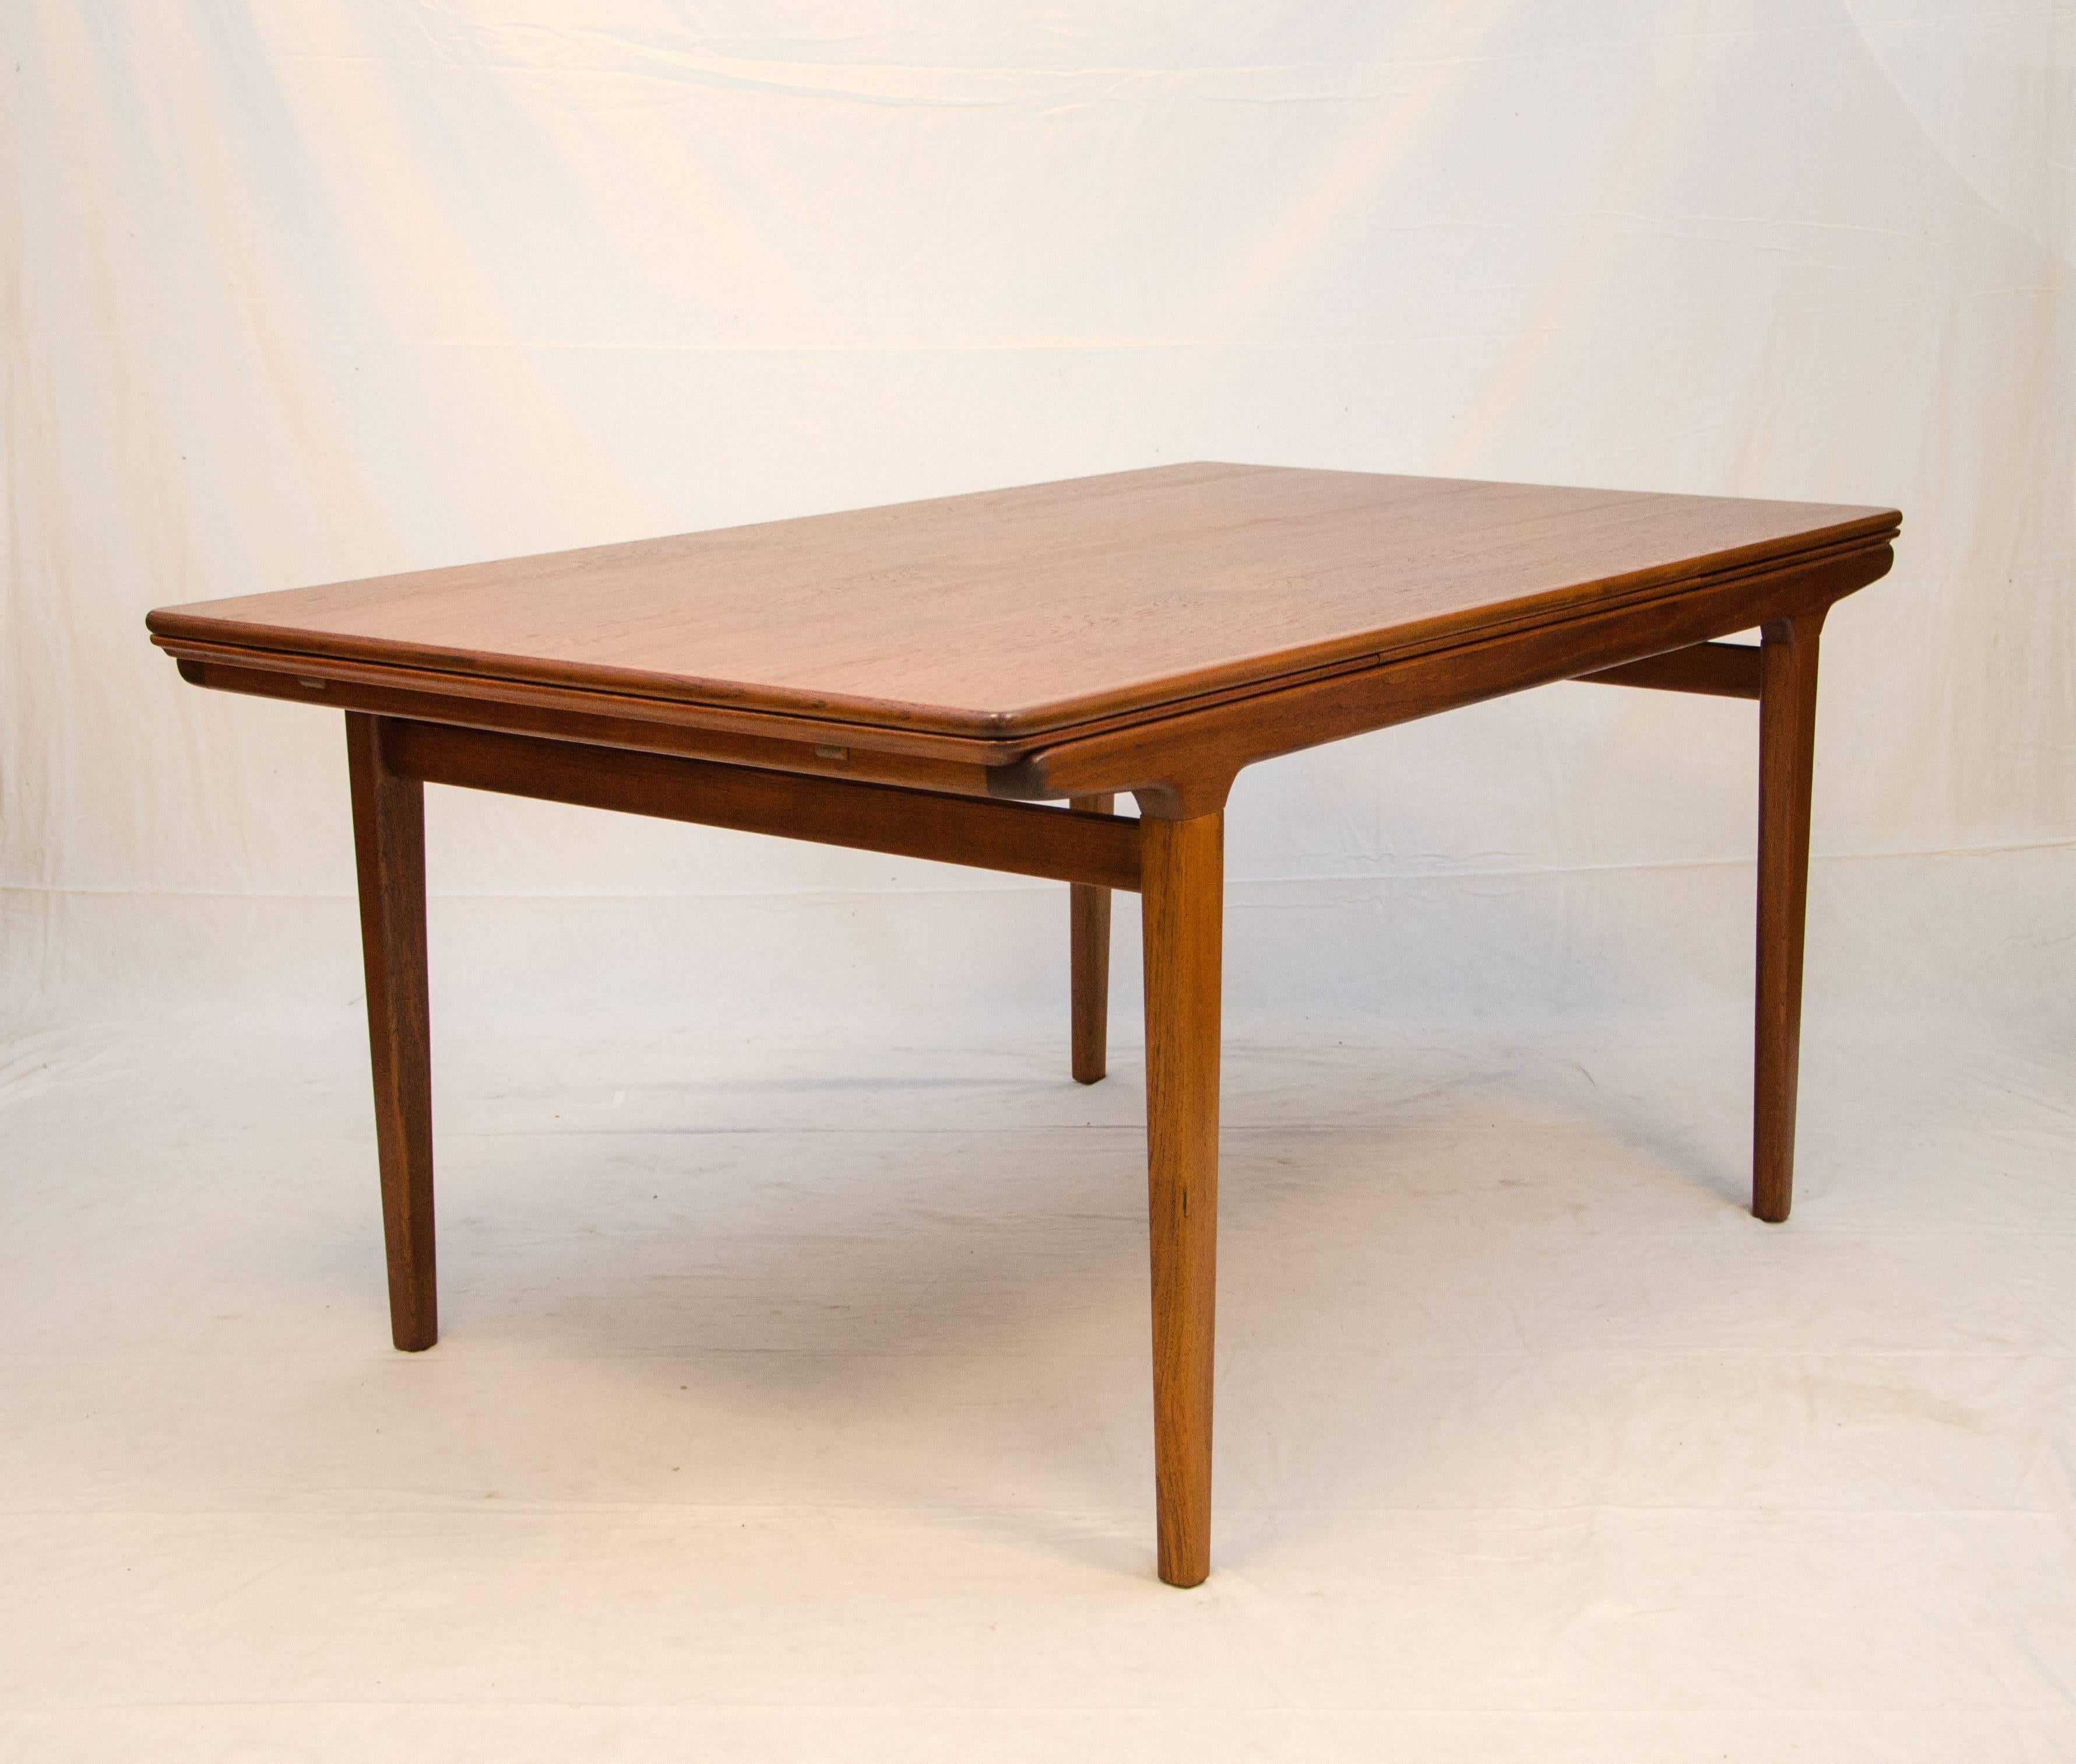 Very well designed Danish dining table by Johannes Andersen, operates the same way as many of the Danish tables with the 19 1/2